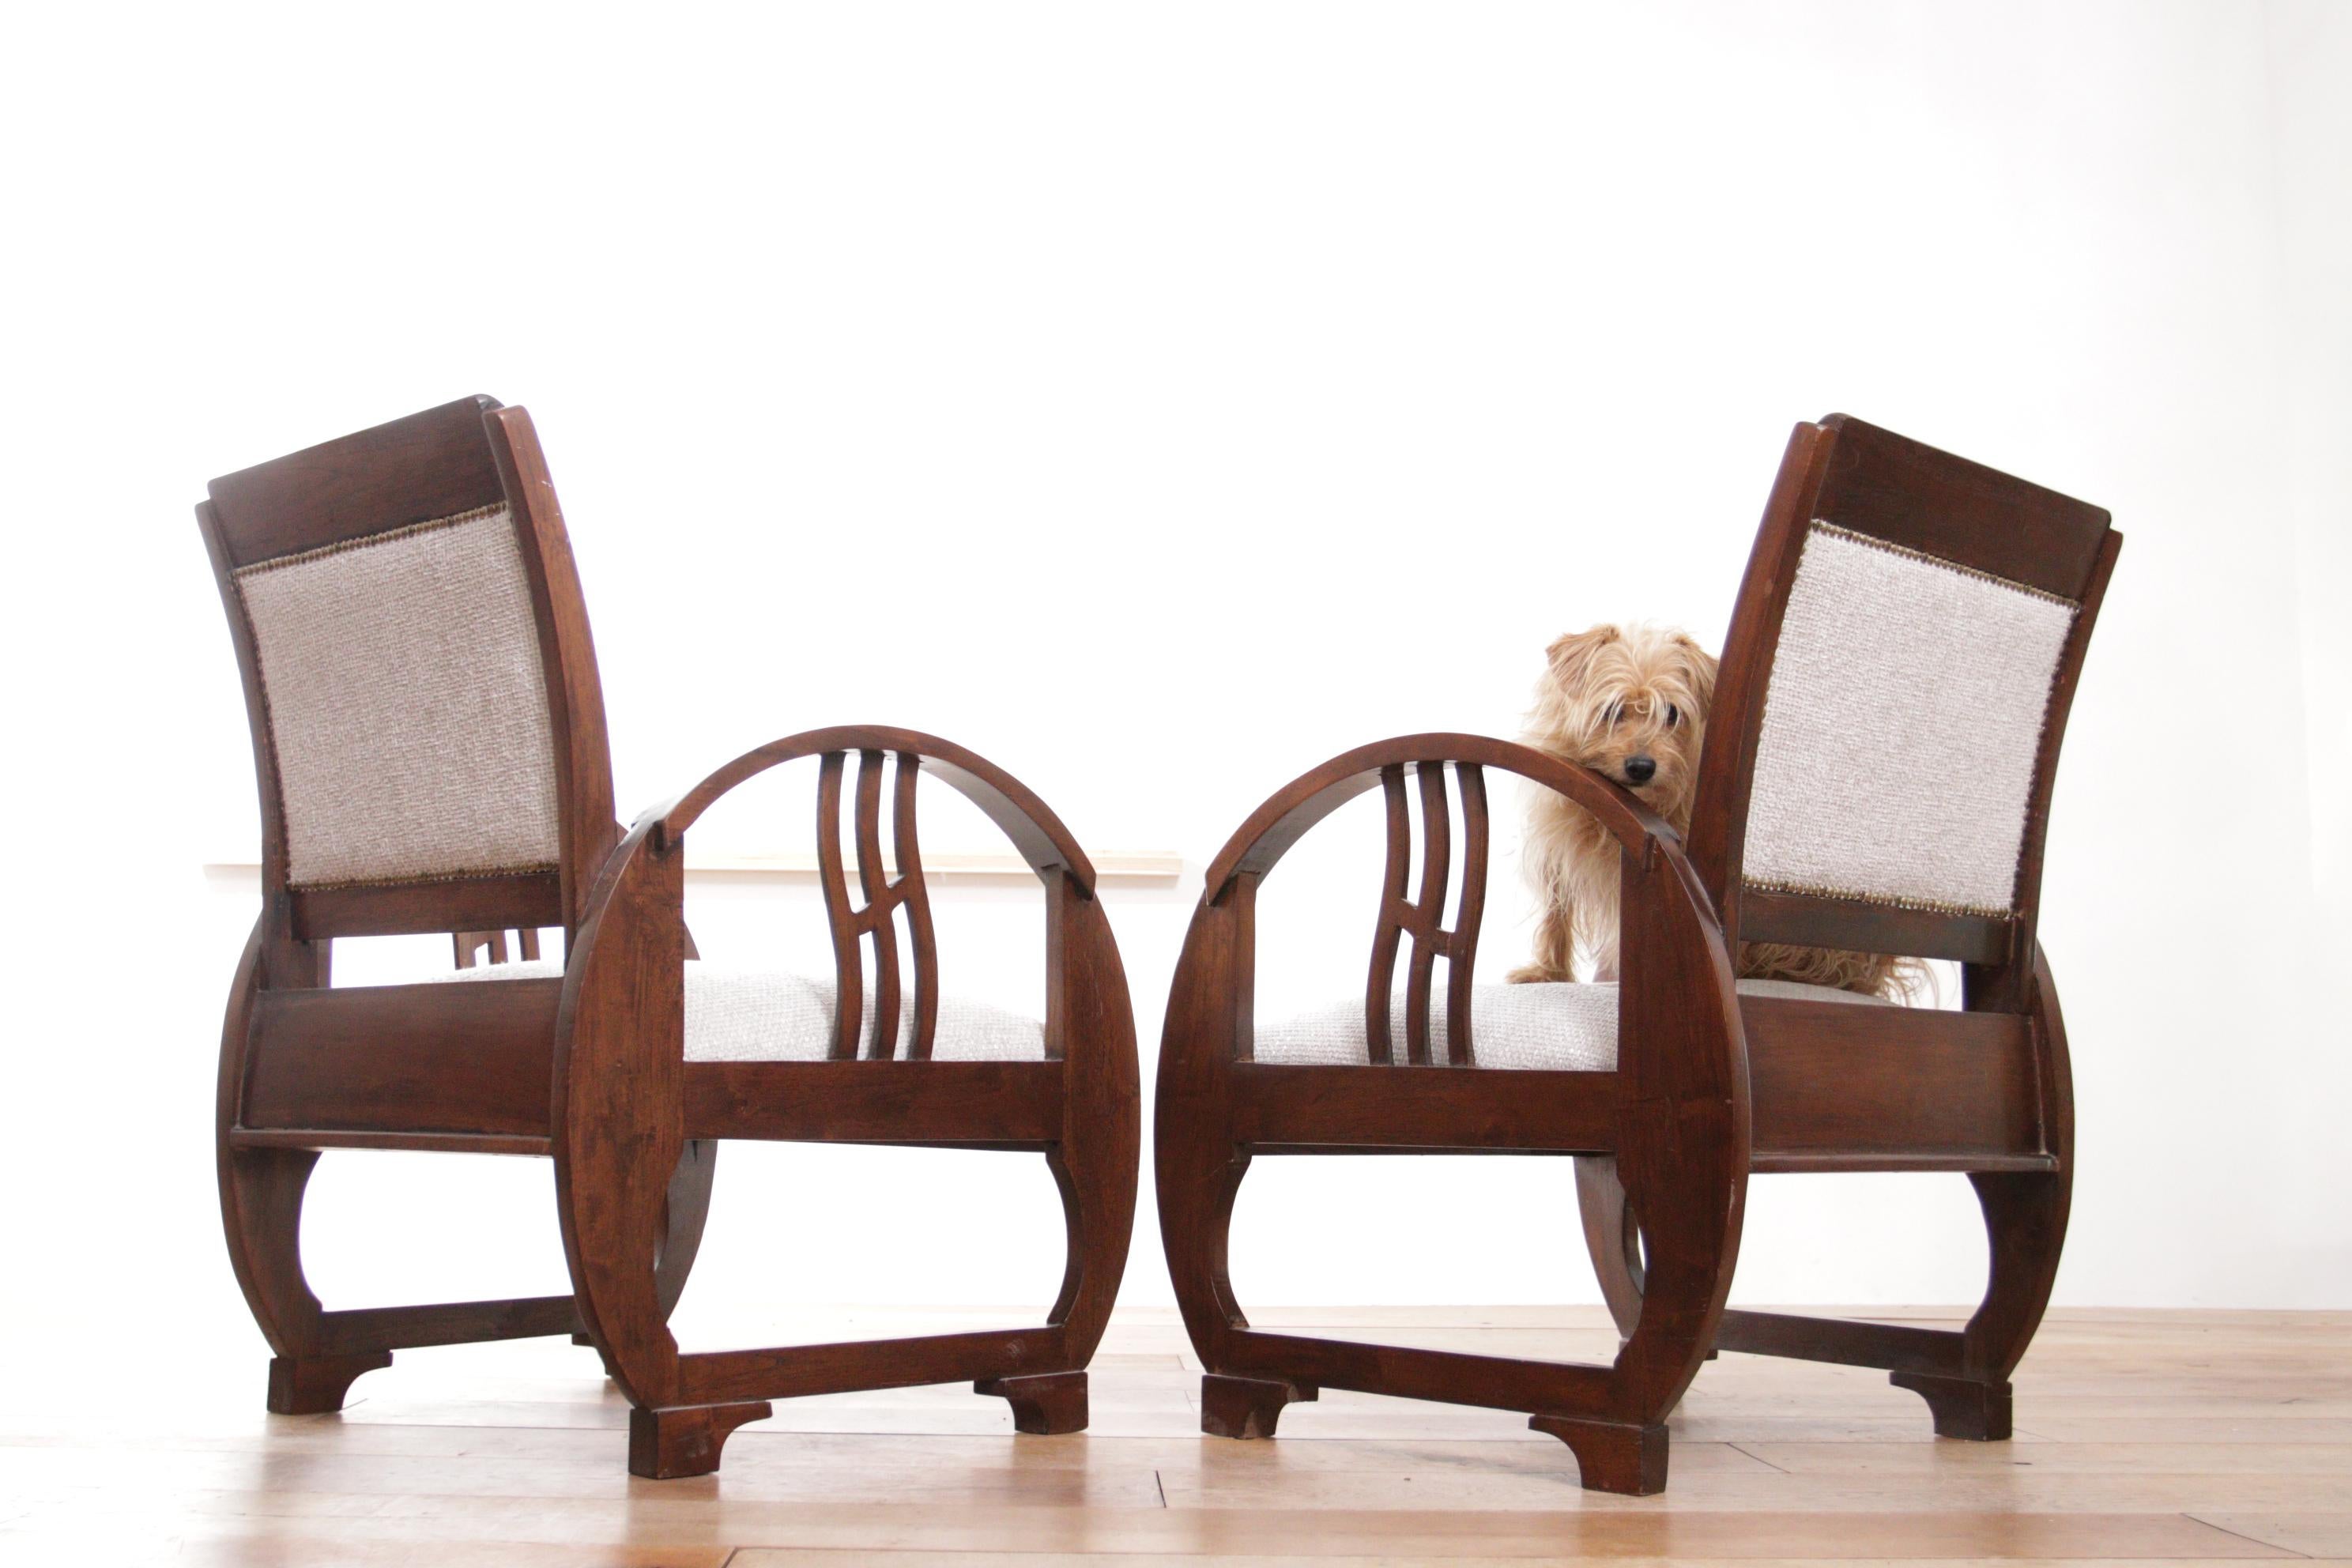 Two Rare Exclusive Elegant Art Deco Vintage French Wooden Armchairs 1930's For Sale 6